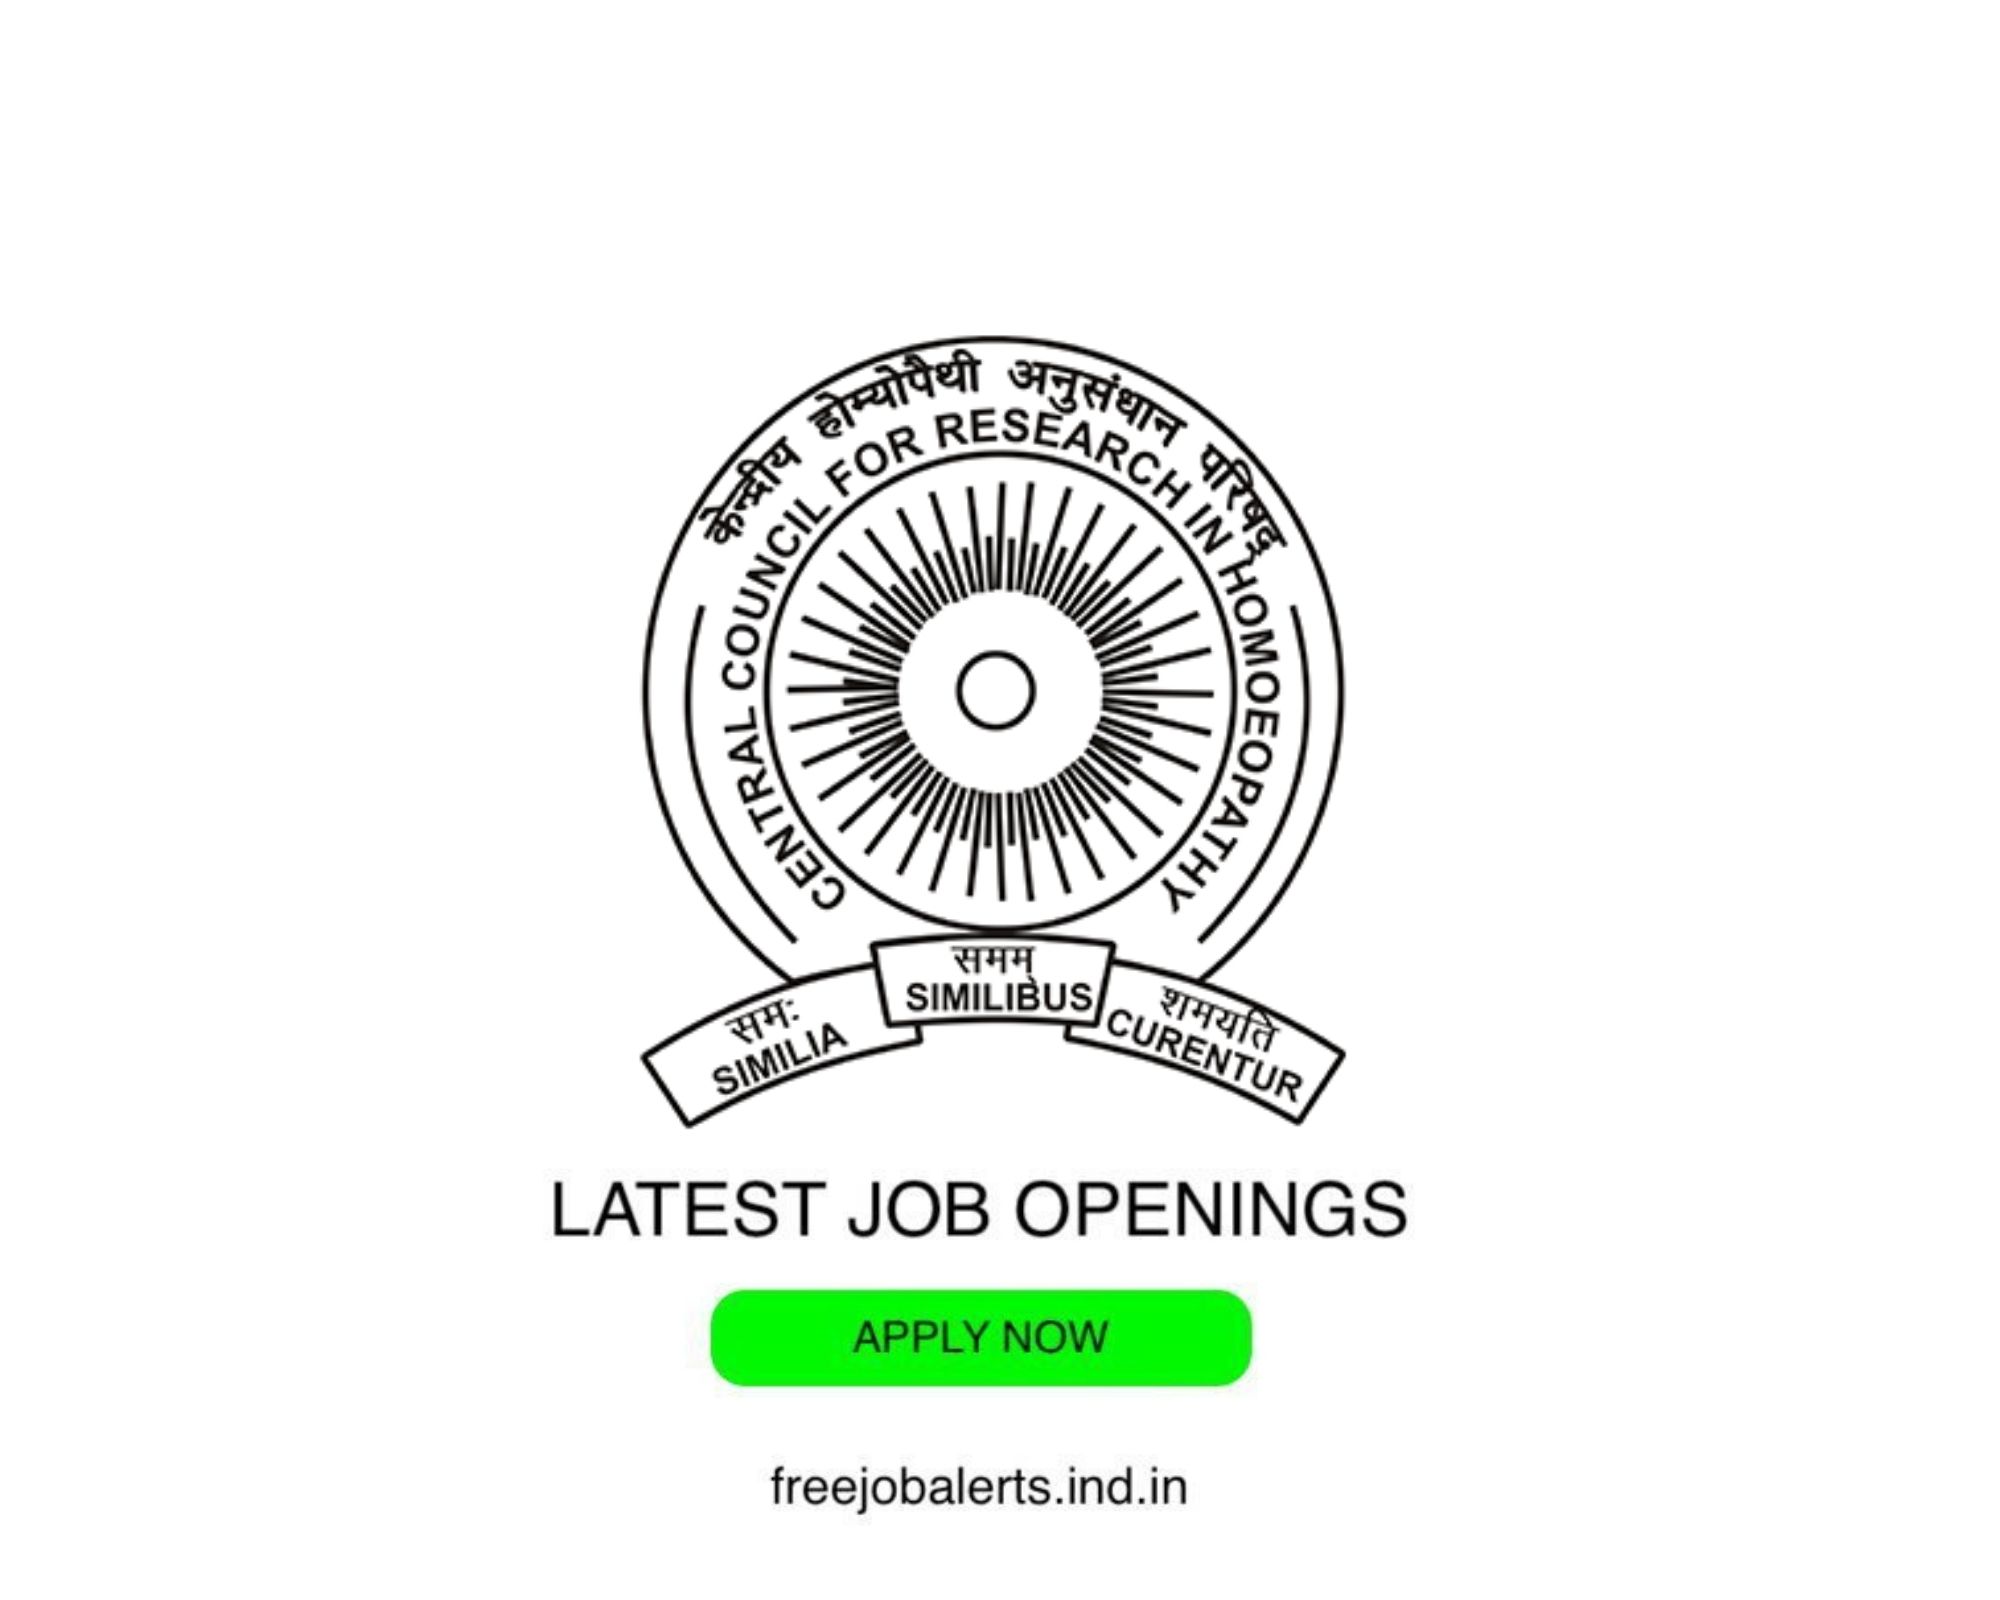 CCRH- Central Council For Research in Homoeopathy- Latest Govt job openings - Free job alerts, Indian Govt Jobs